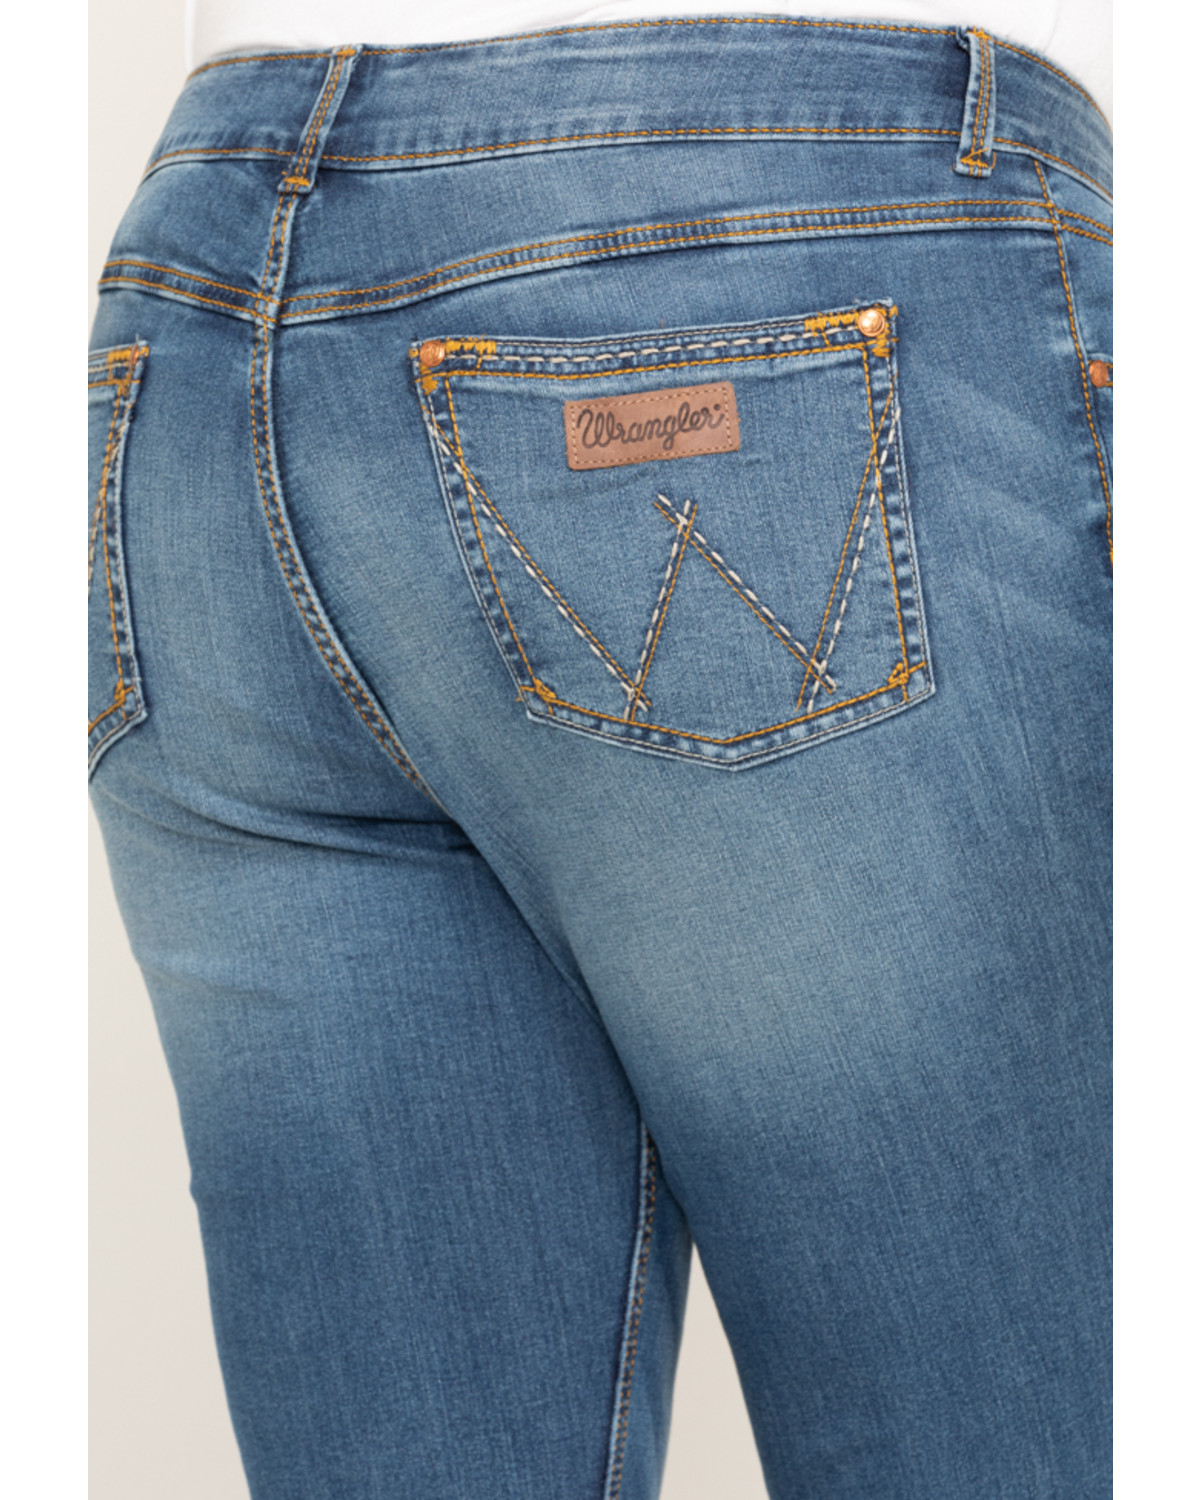 Wrangler Retro Women's Mae Mid Rise Jeans - Plus - Country Outfitter